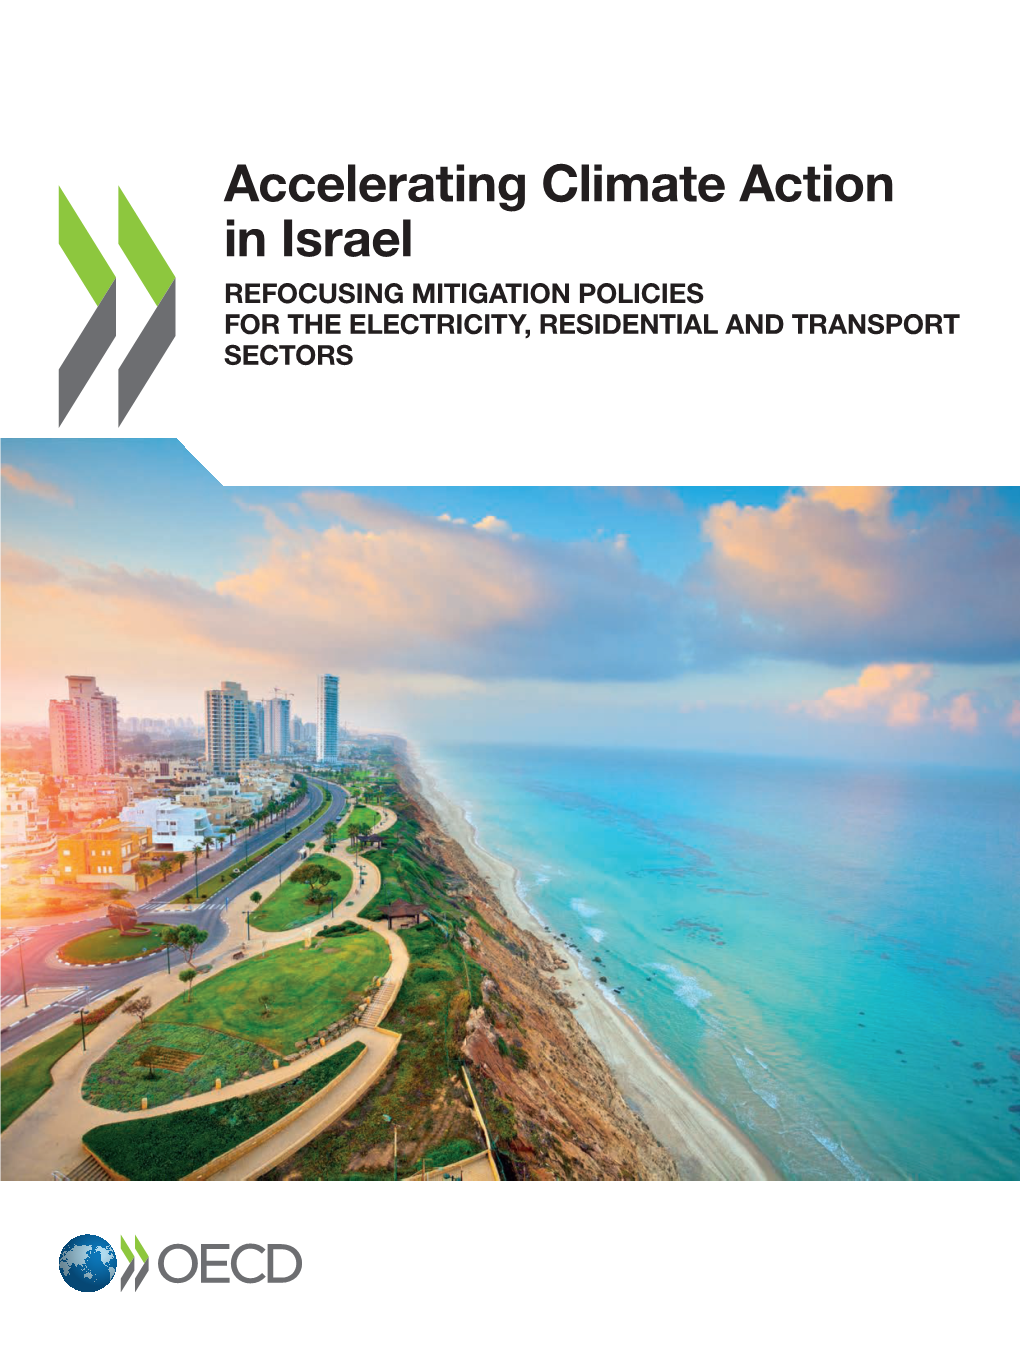 Accelerating Climate Action in Israel